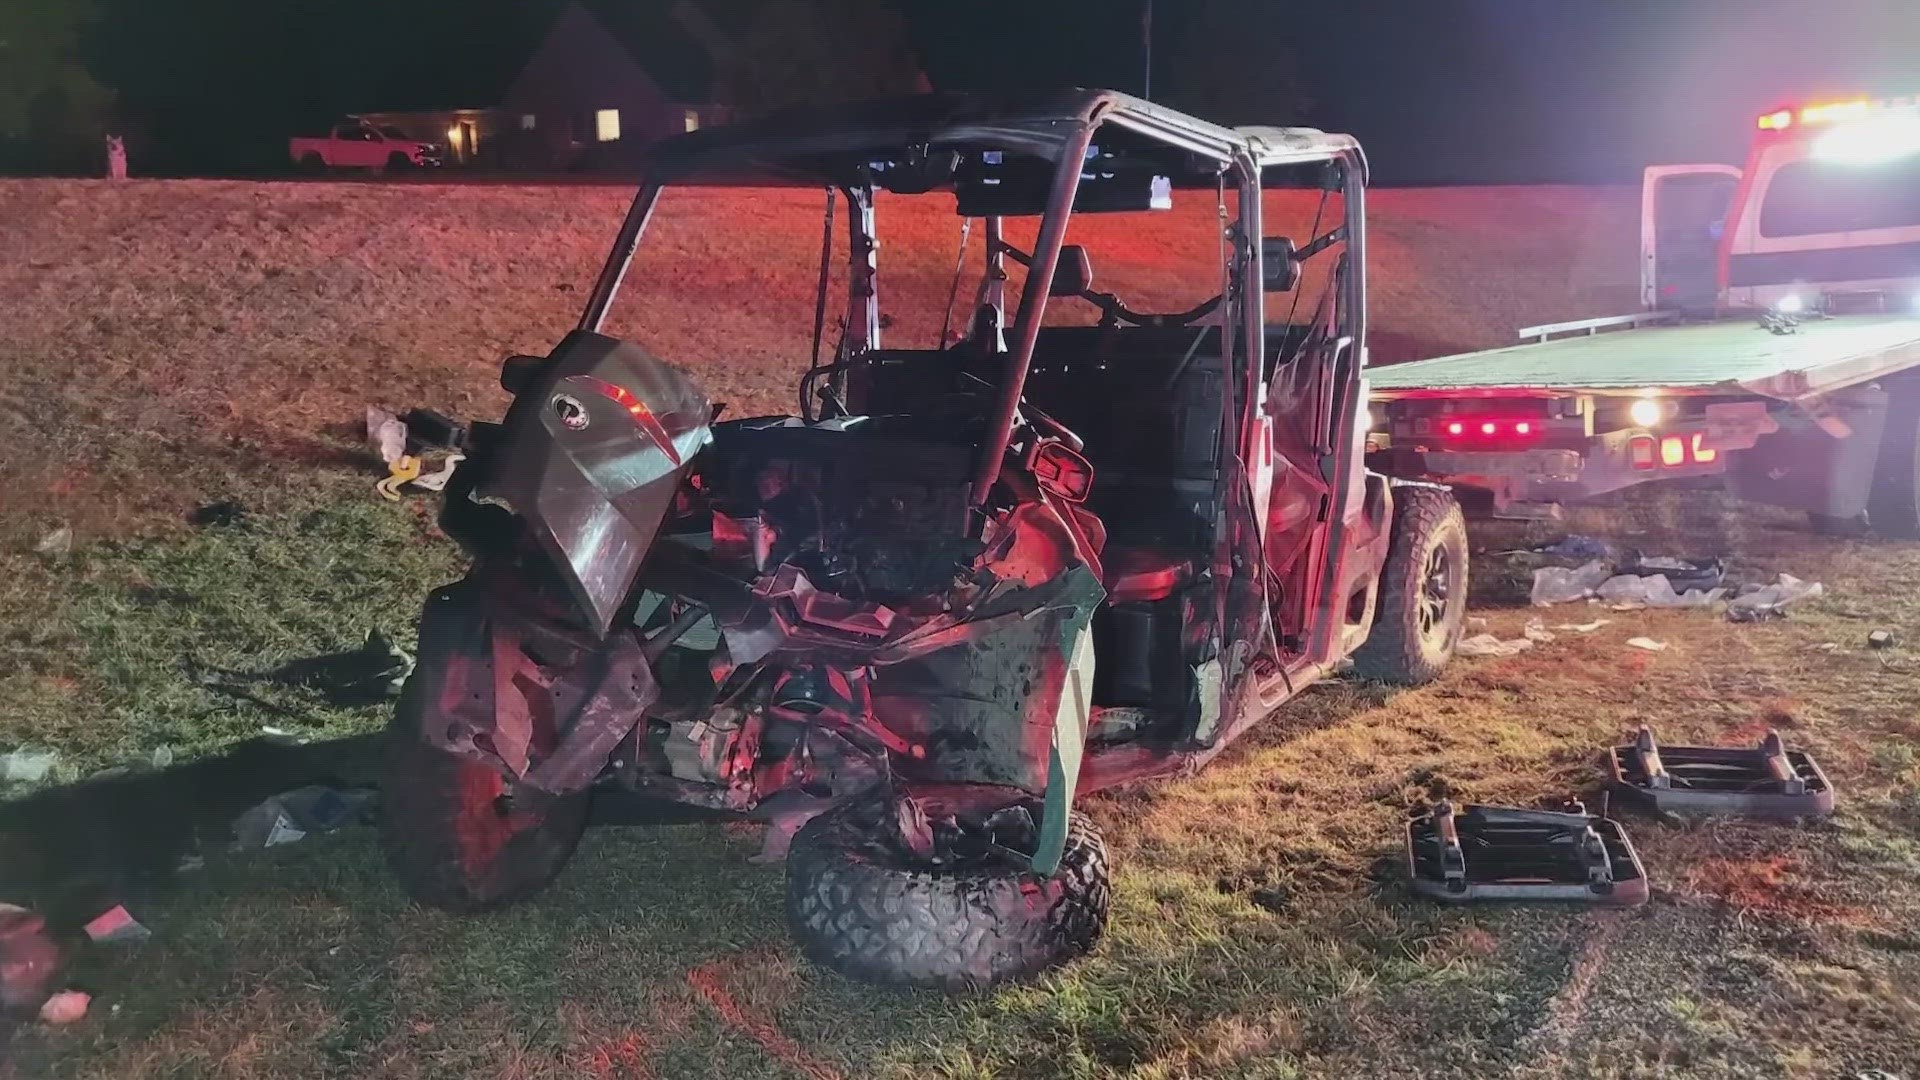 Troopers say the off-road vehicle ran a stop sign in rural Waxahachie and collided with a pickup truck, ejecting all four occupants of the UTV.